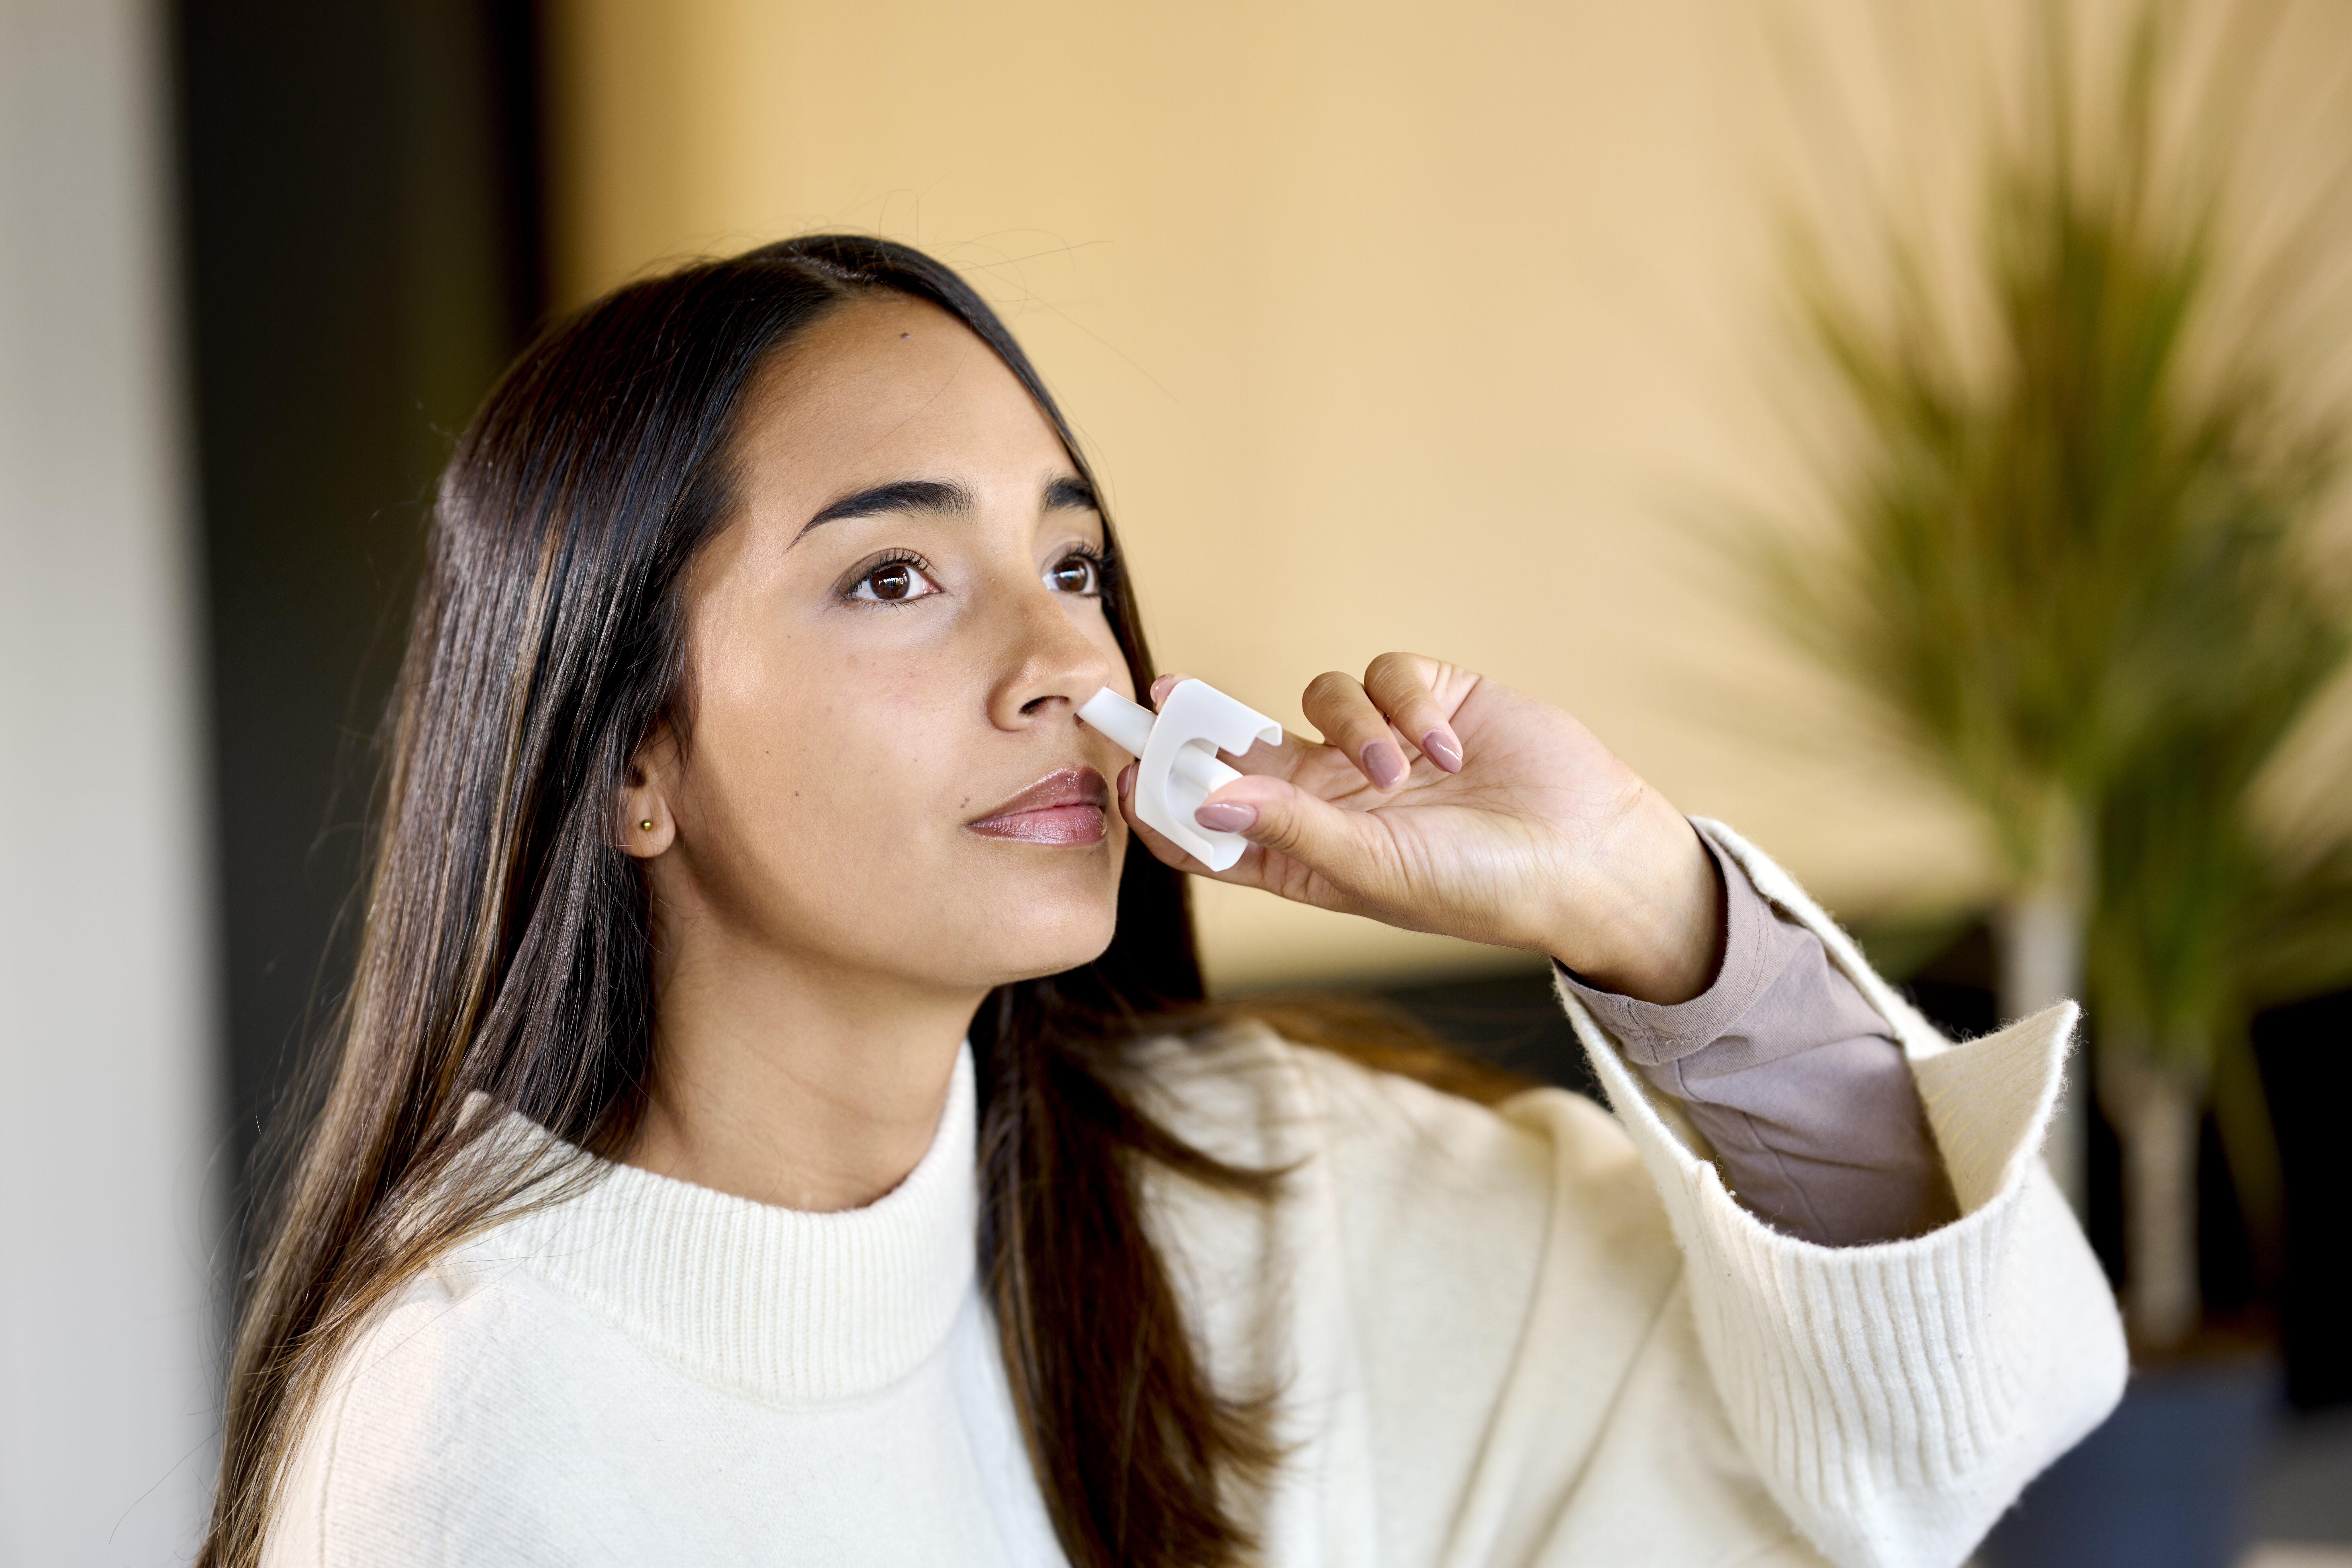 Woman in white jacket administers a single precise dose from an Aptar Unidose liquid nasal spray device zoom view